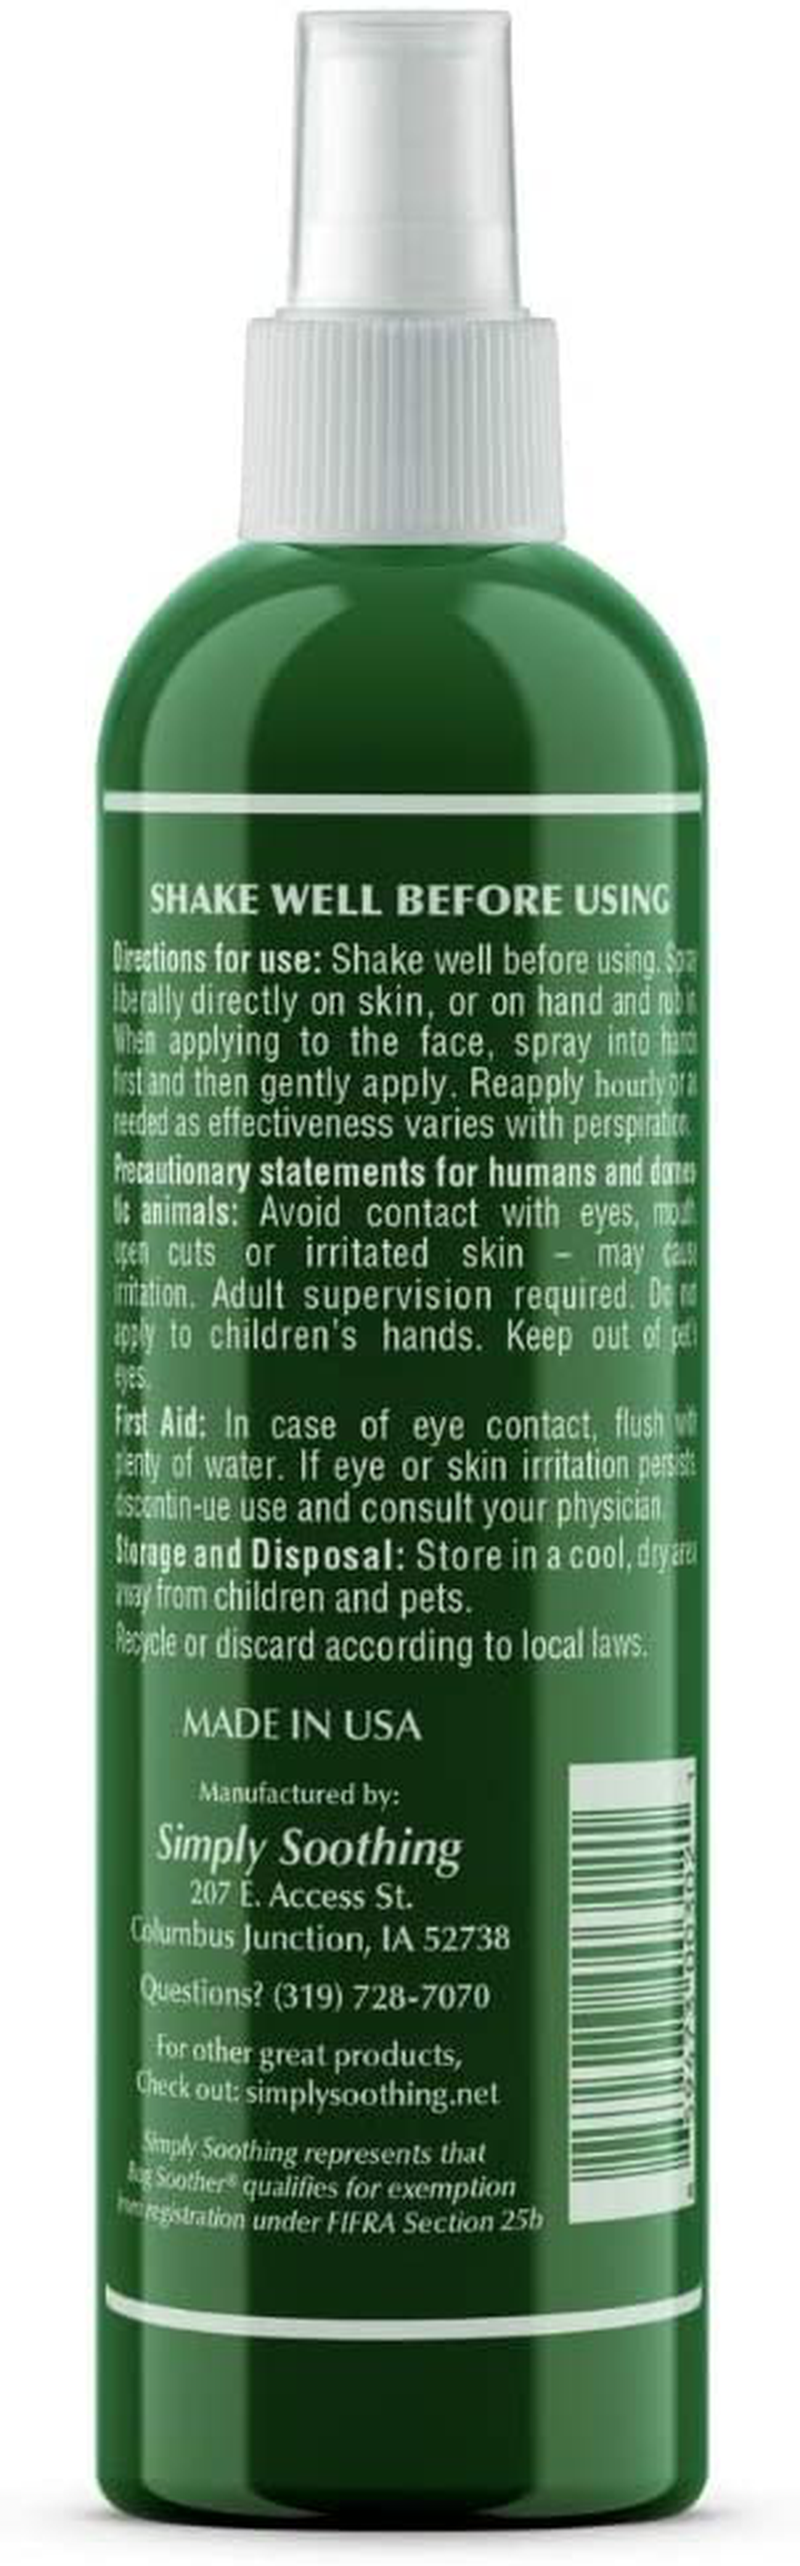 Bug Soother Spray - Natural Insect, Gnat and Mosquito Repellent & Deterrent - DEET Free - Safe Bug Spray for Adults, Kids, Pets, & Environment - Made in USA - Includes 1 oz. Travel Size (3, 4 oz.)